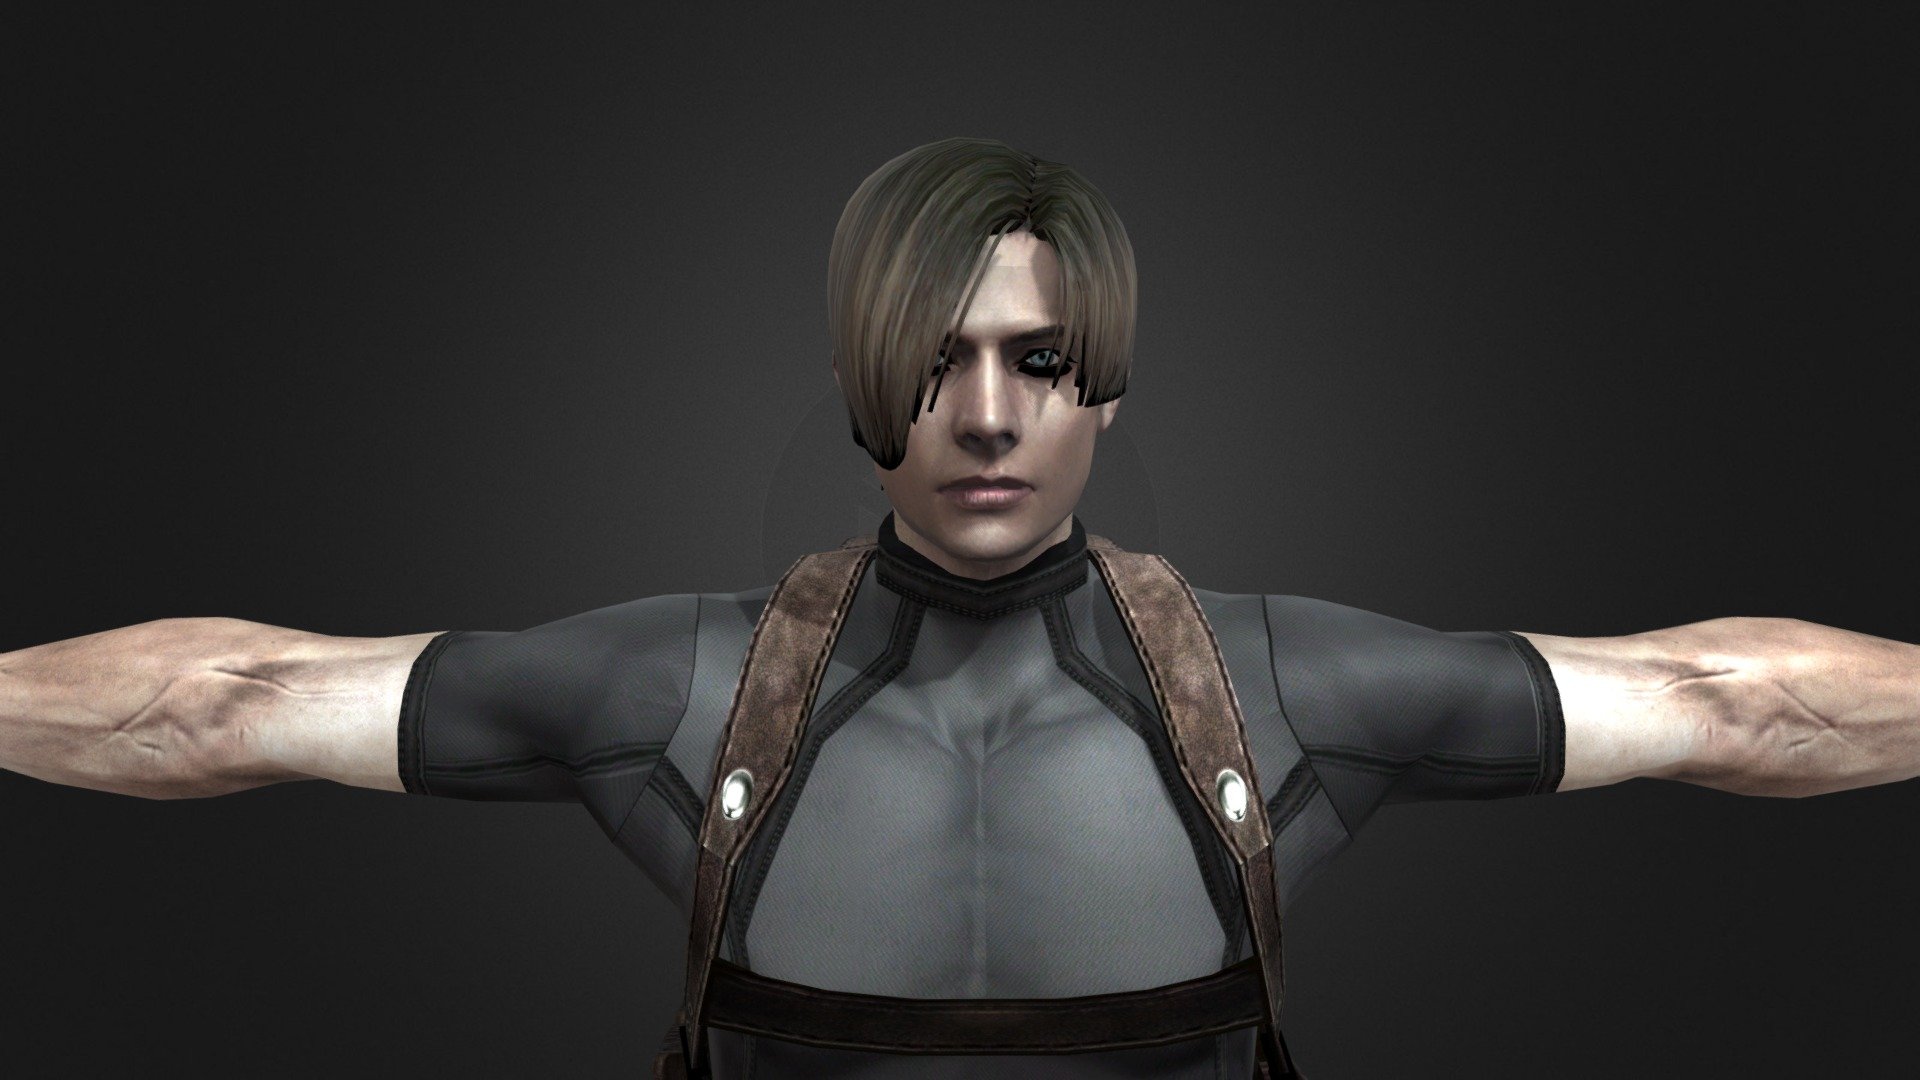 Leon Kennedy Re4 Model | Hot Sex Picture